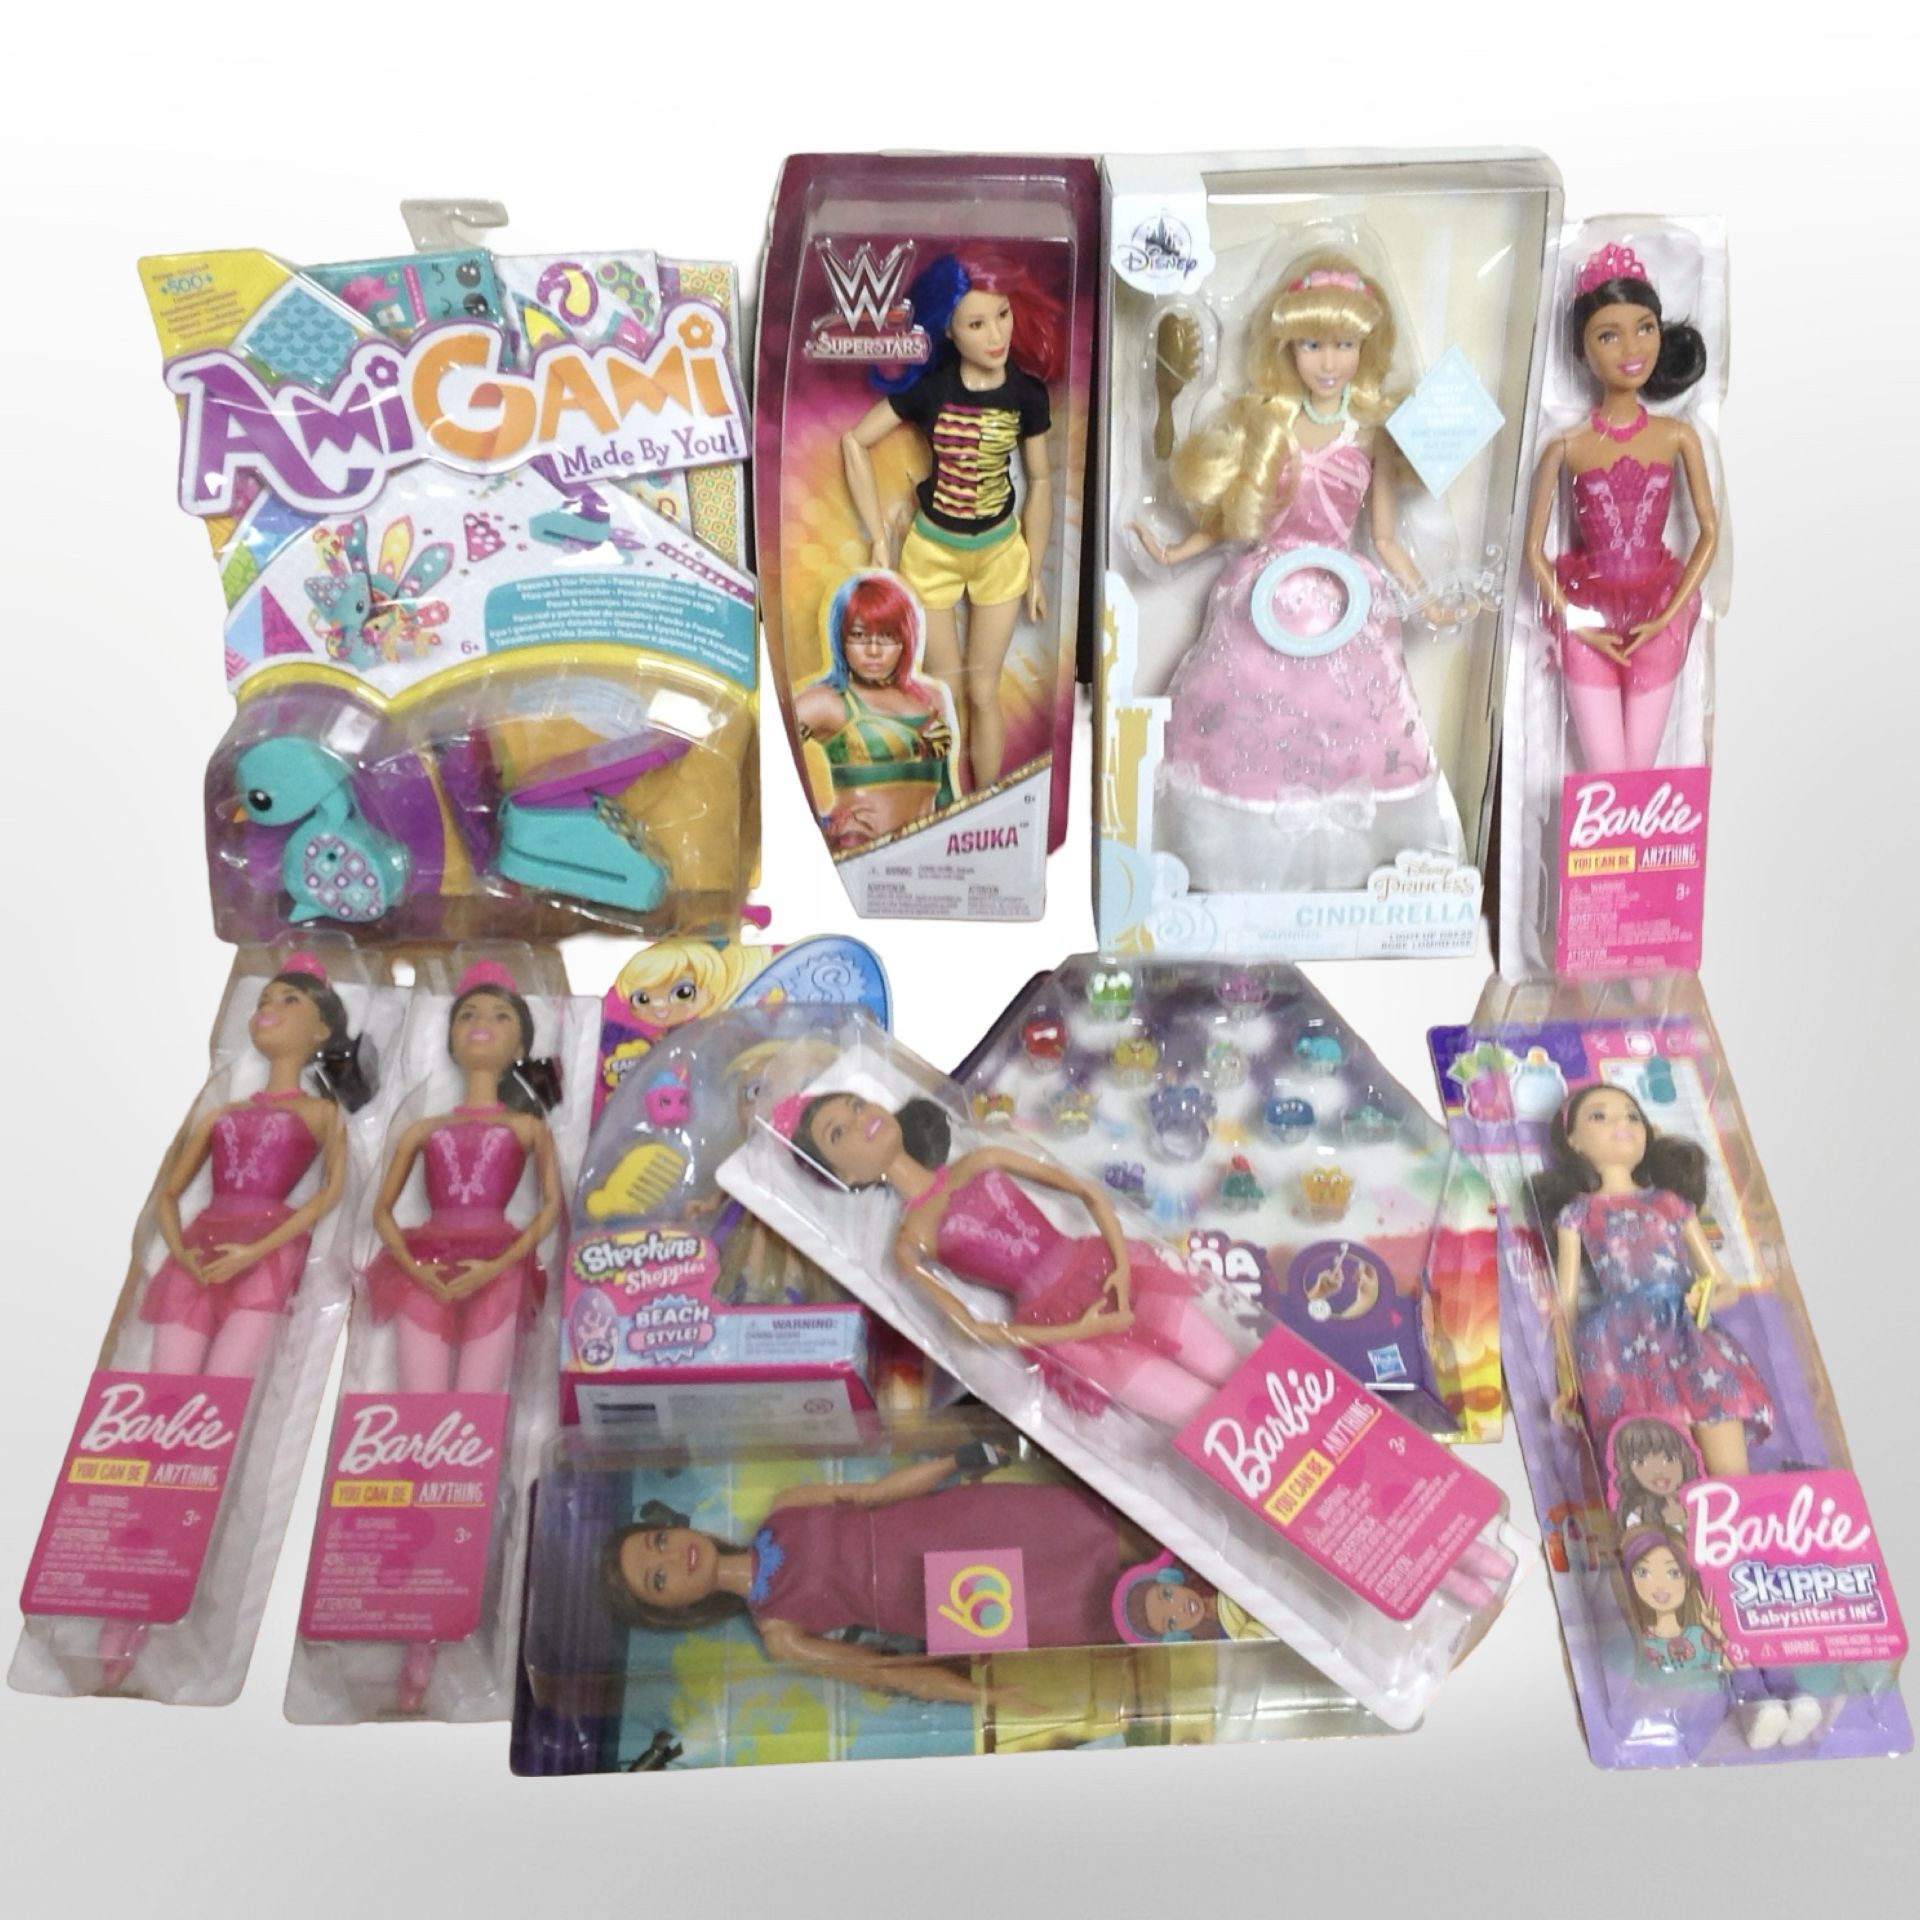 11 Disney, Mattel and other toys including Barbie.